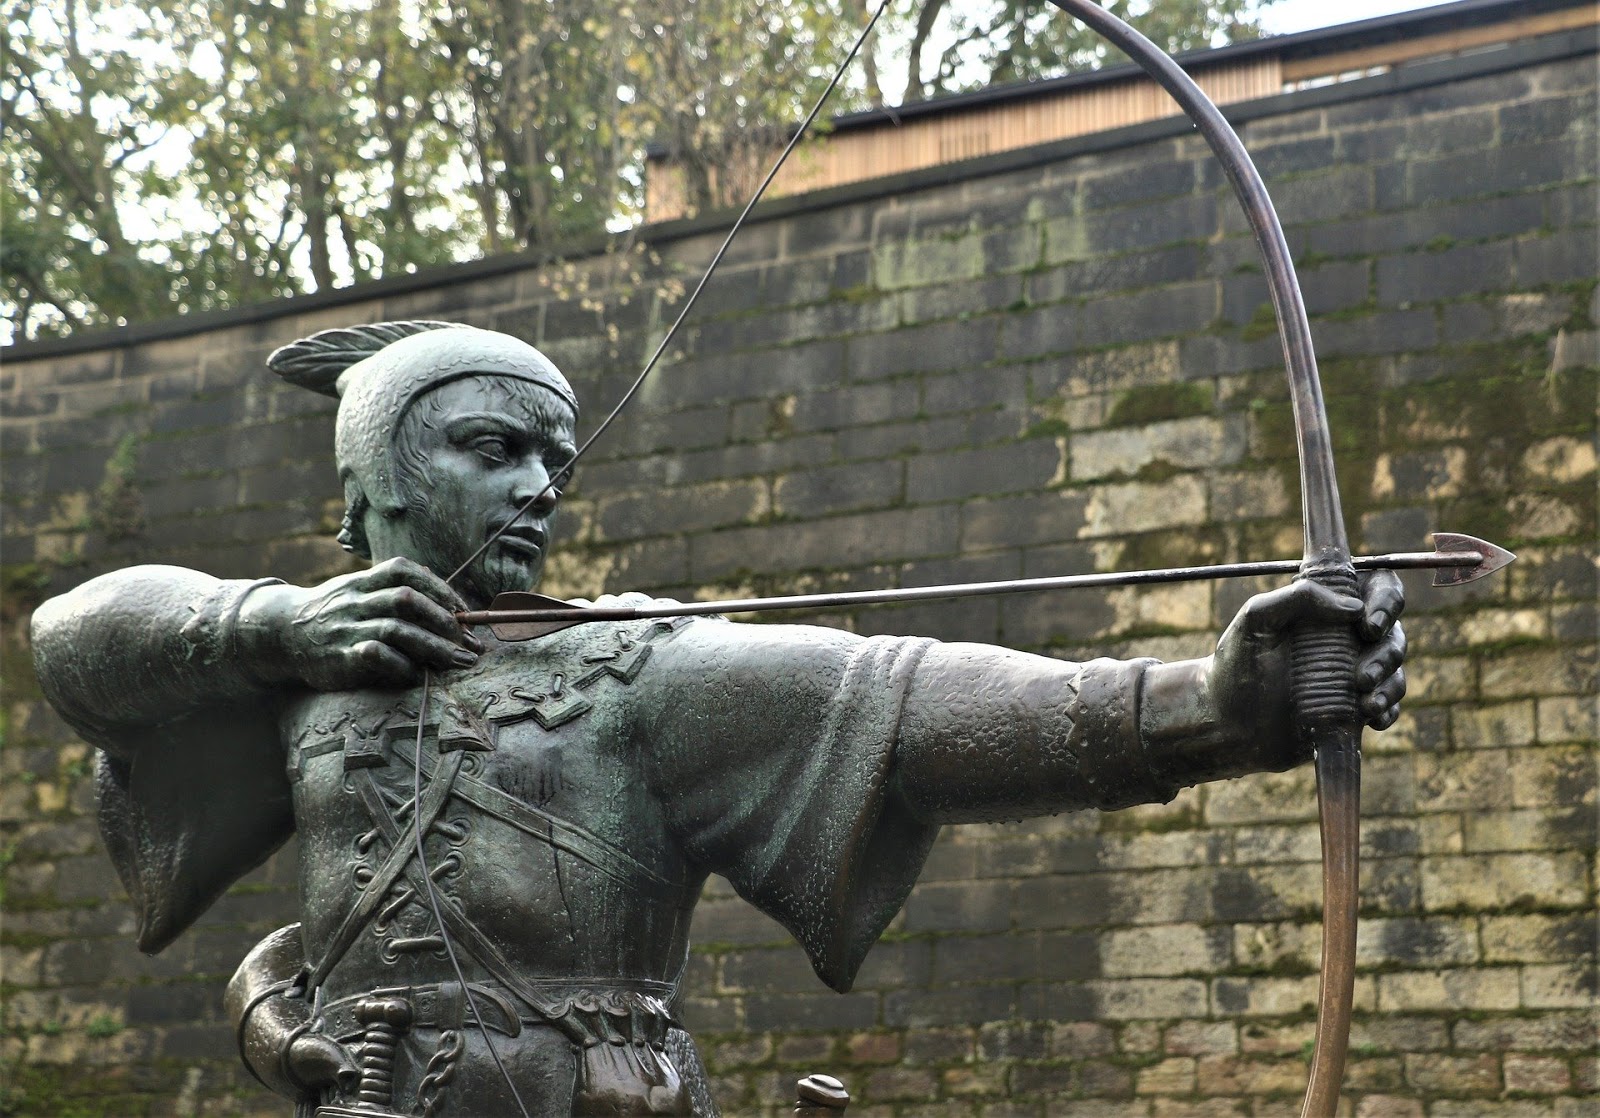 This is a color photo of a sculpted archer. The archer is dressed as Robin Hood, and he is in position to shoot his arrow.